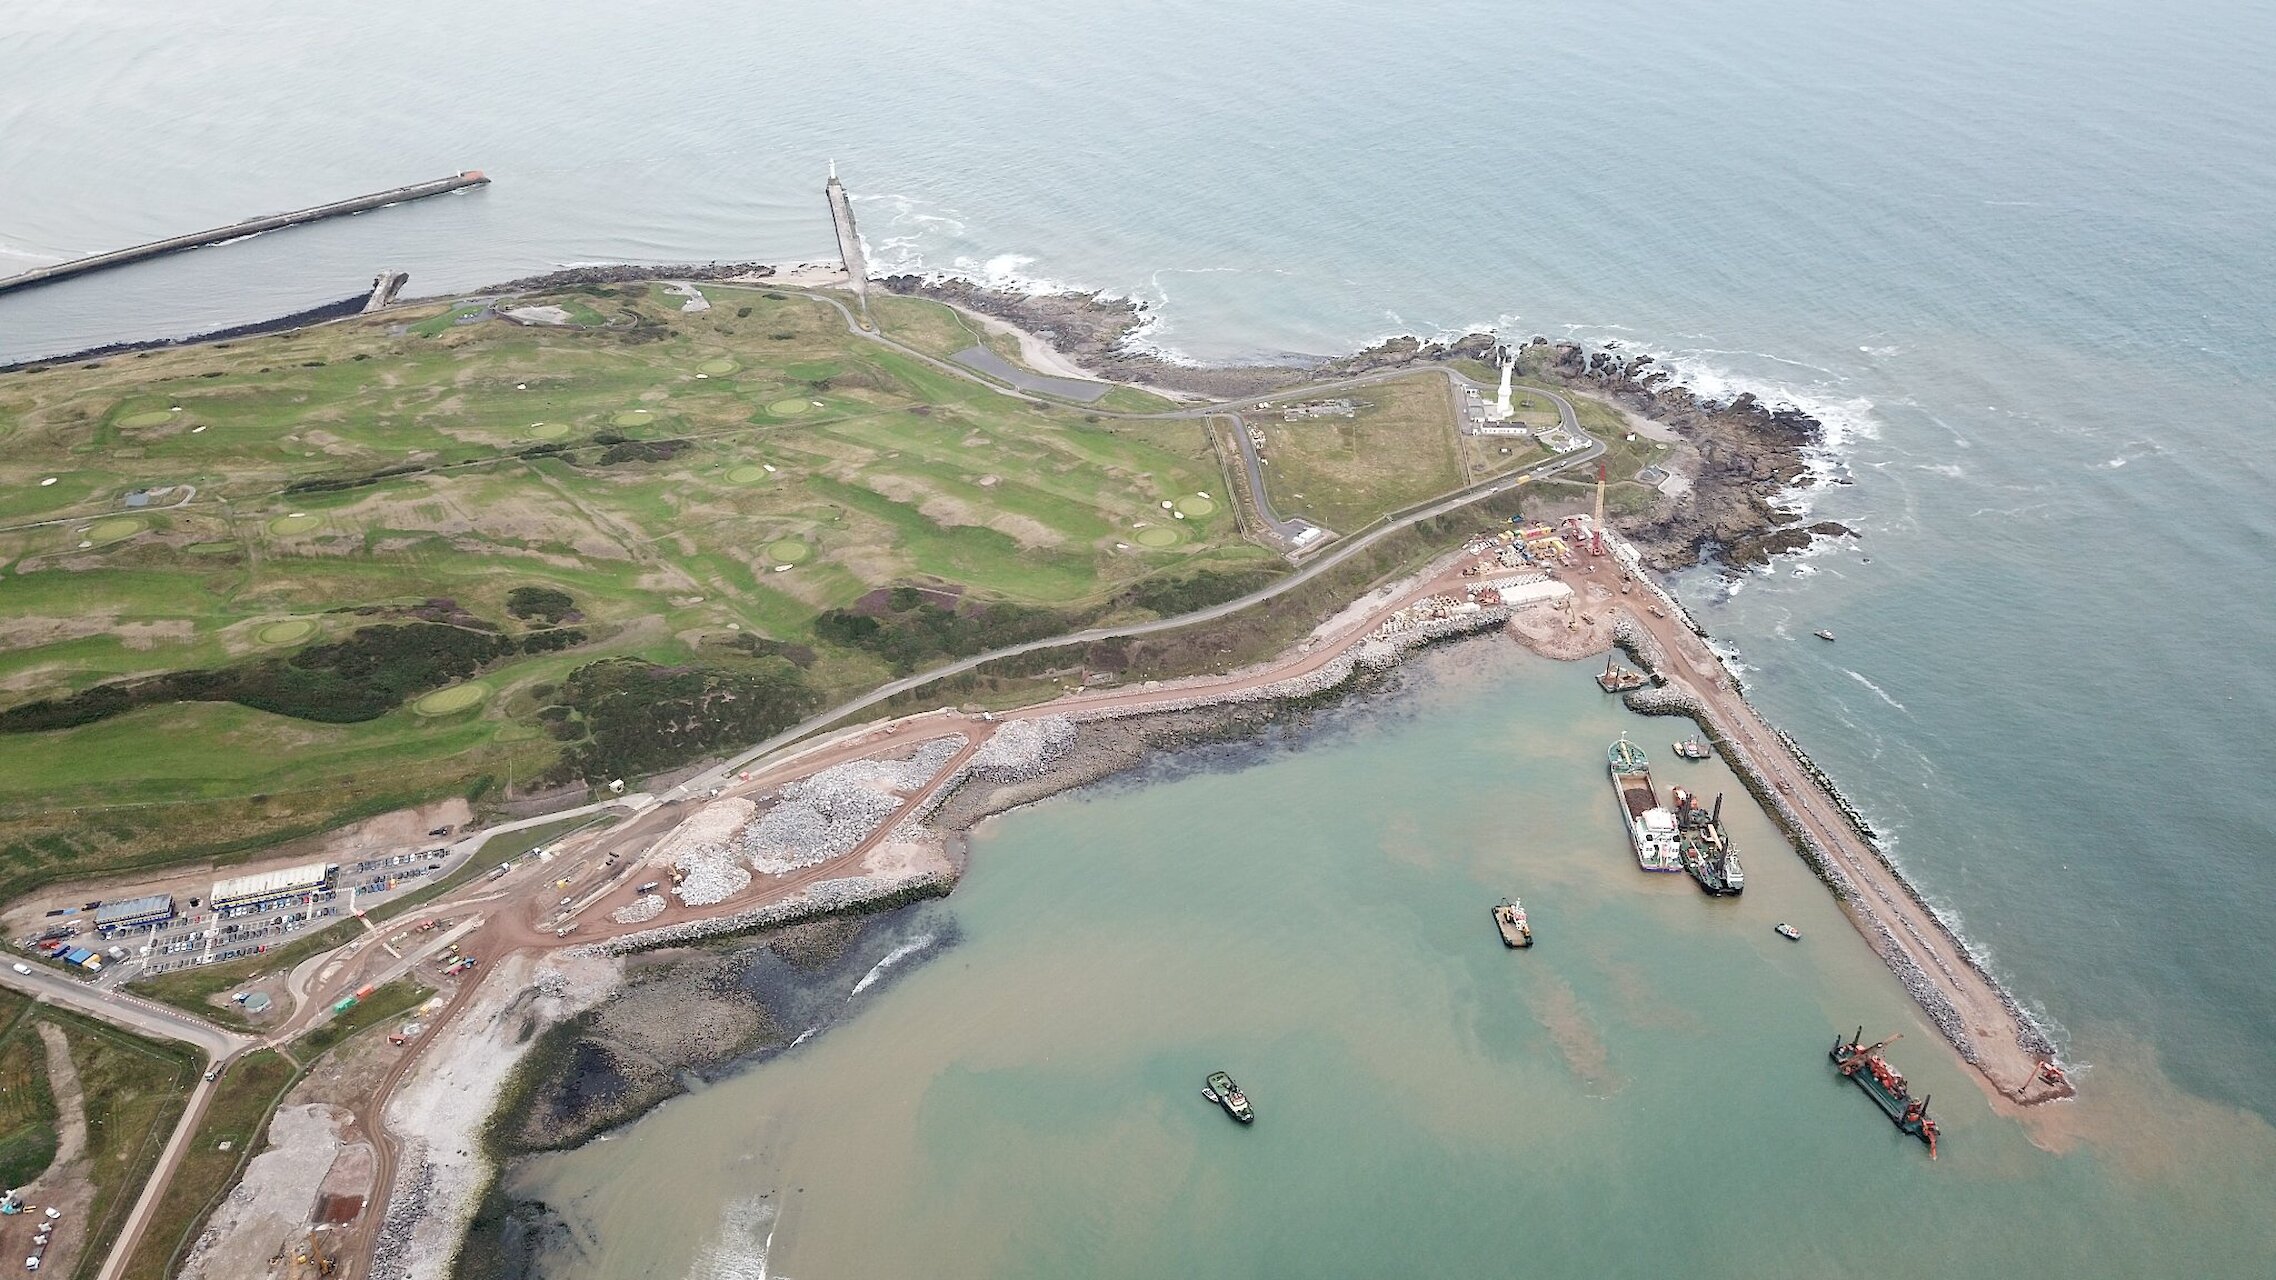 North Breakwater in Early Stages of Construction